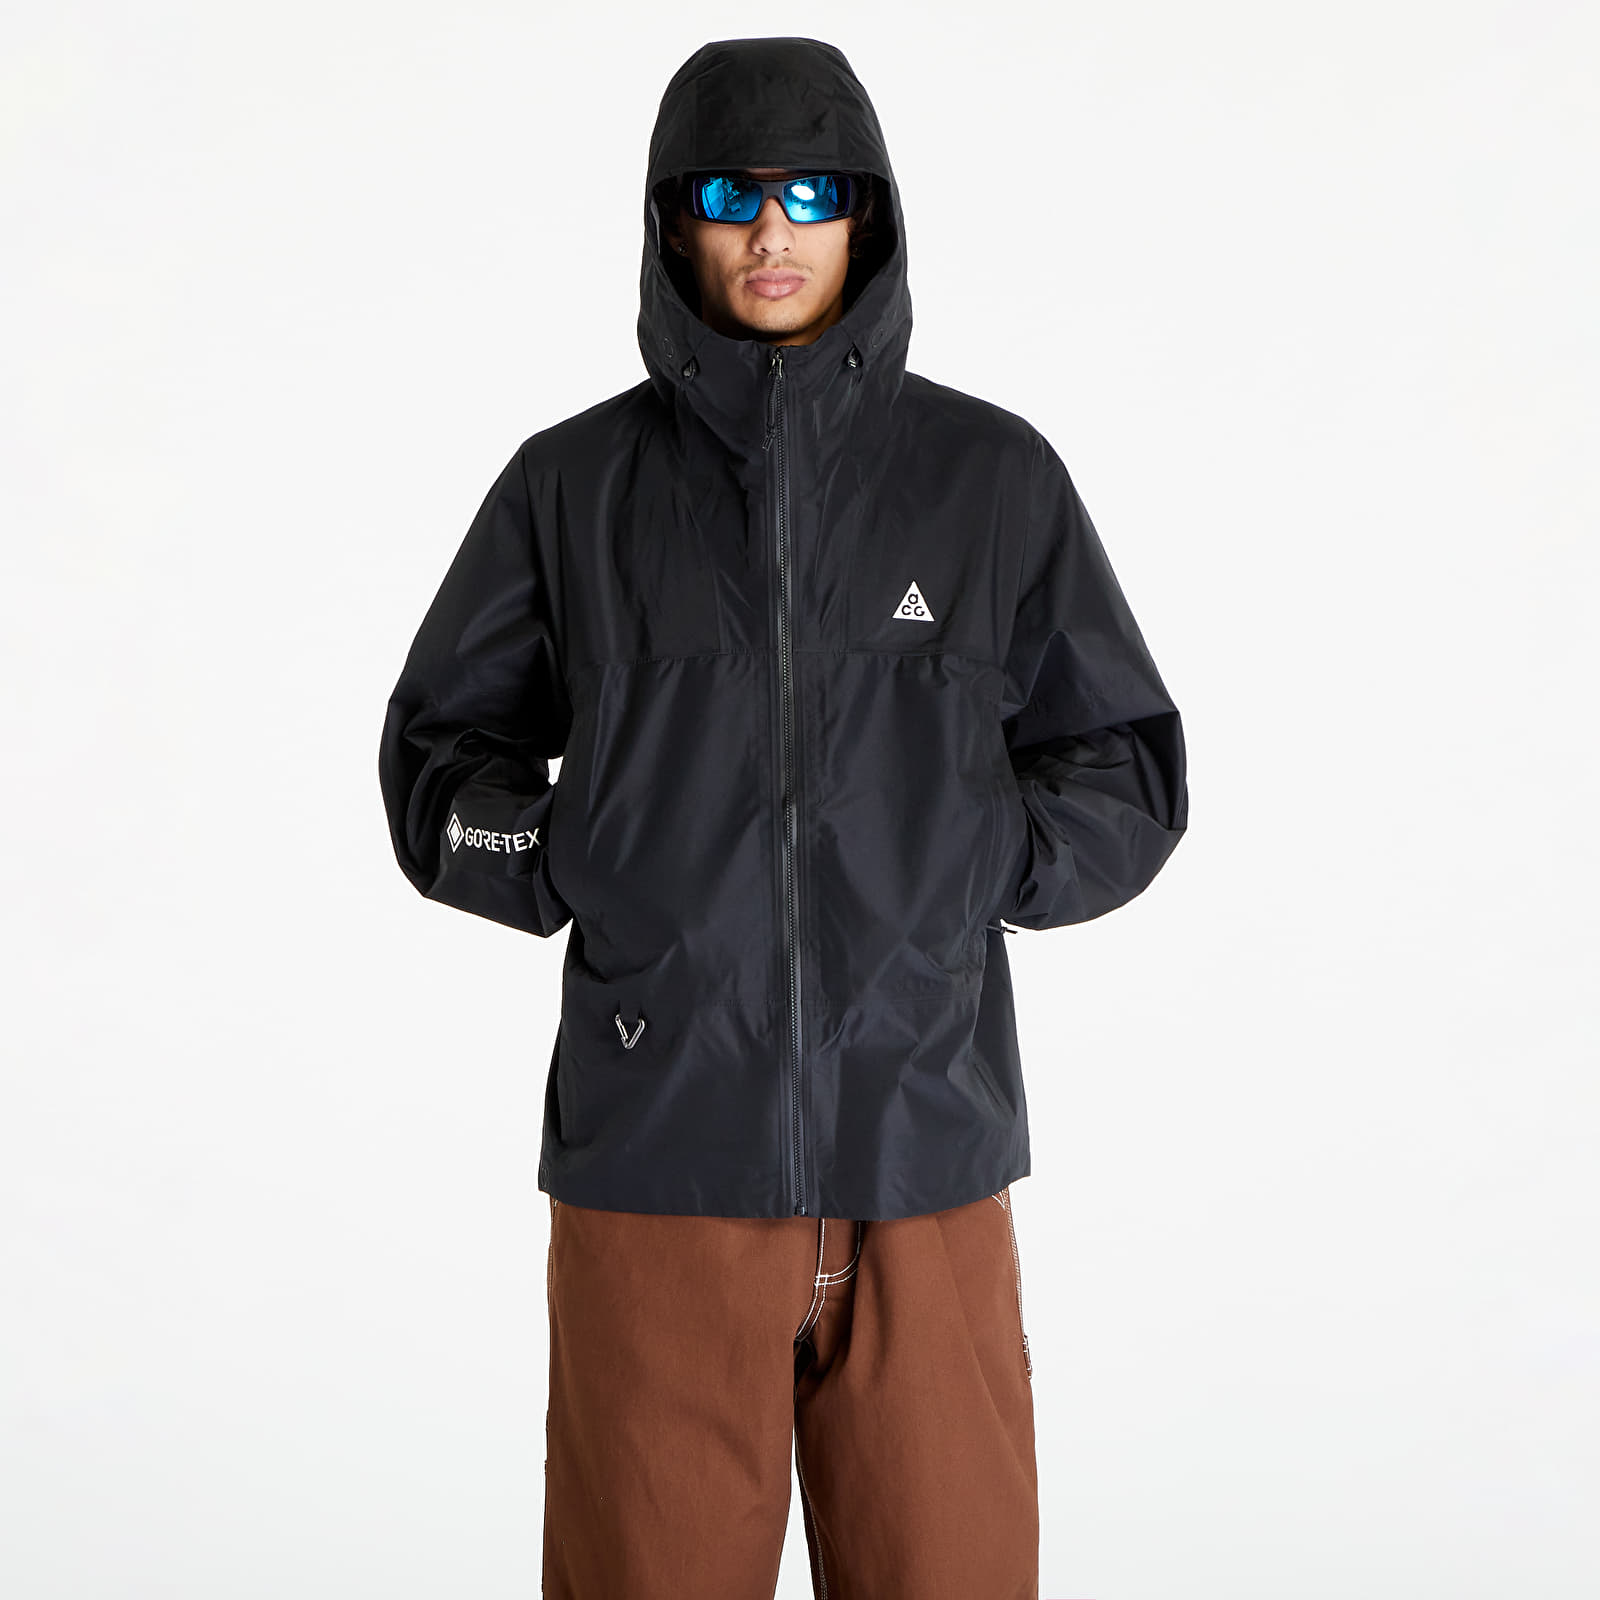 Bundy Nike Storm-FIT ADV ACG "Chain of Craters" Jacket Black/ Summit White